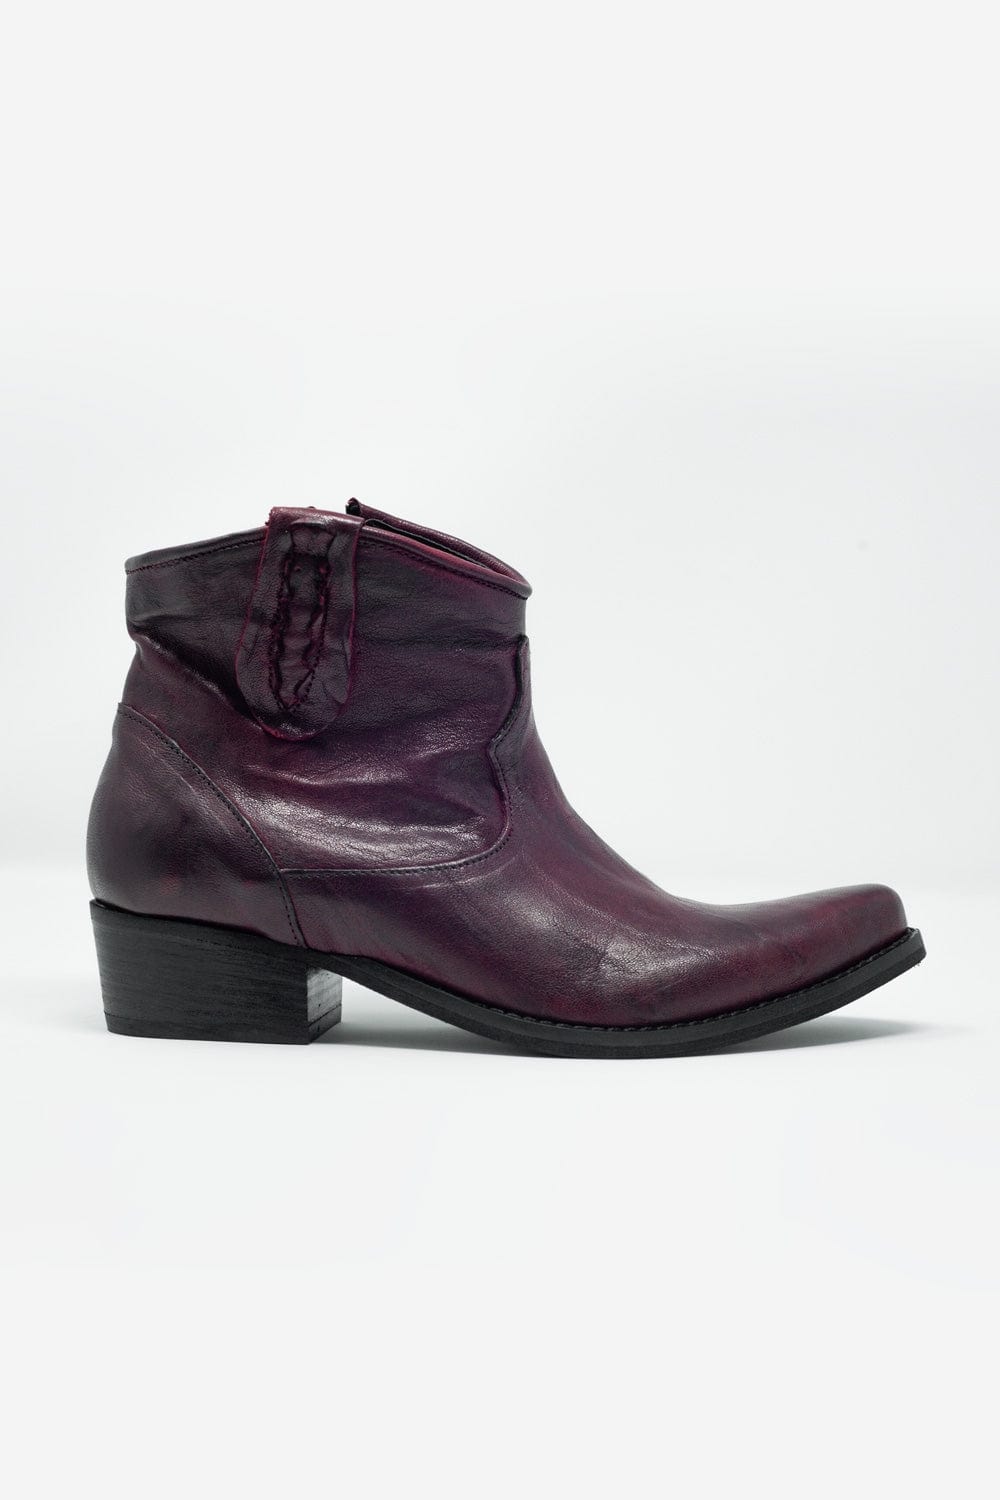 Q2 Women's Shoe Western Sock Boots in Maroon with Detail on the Side